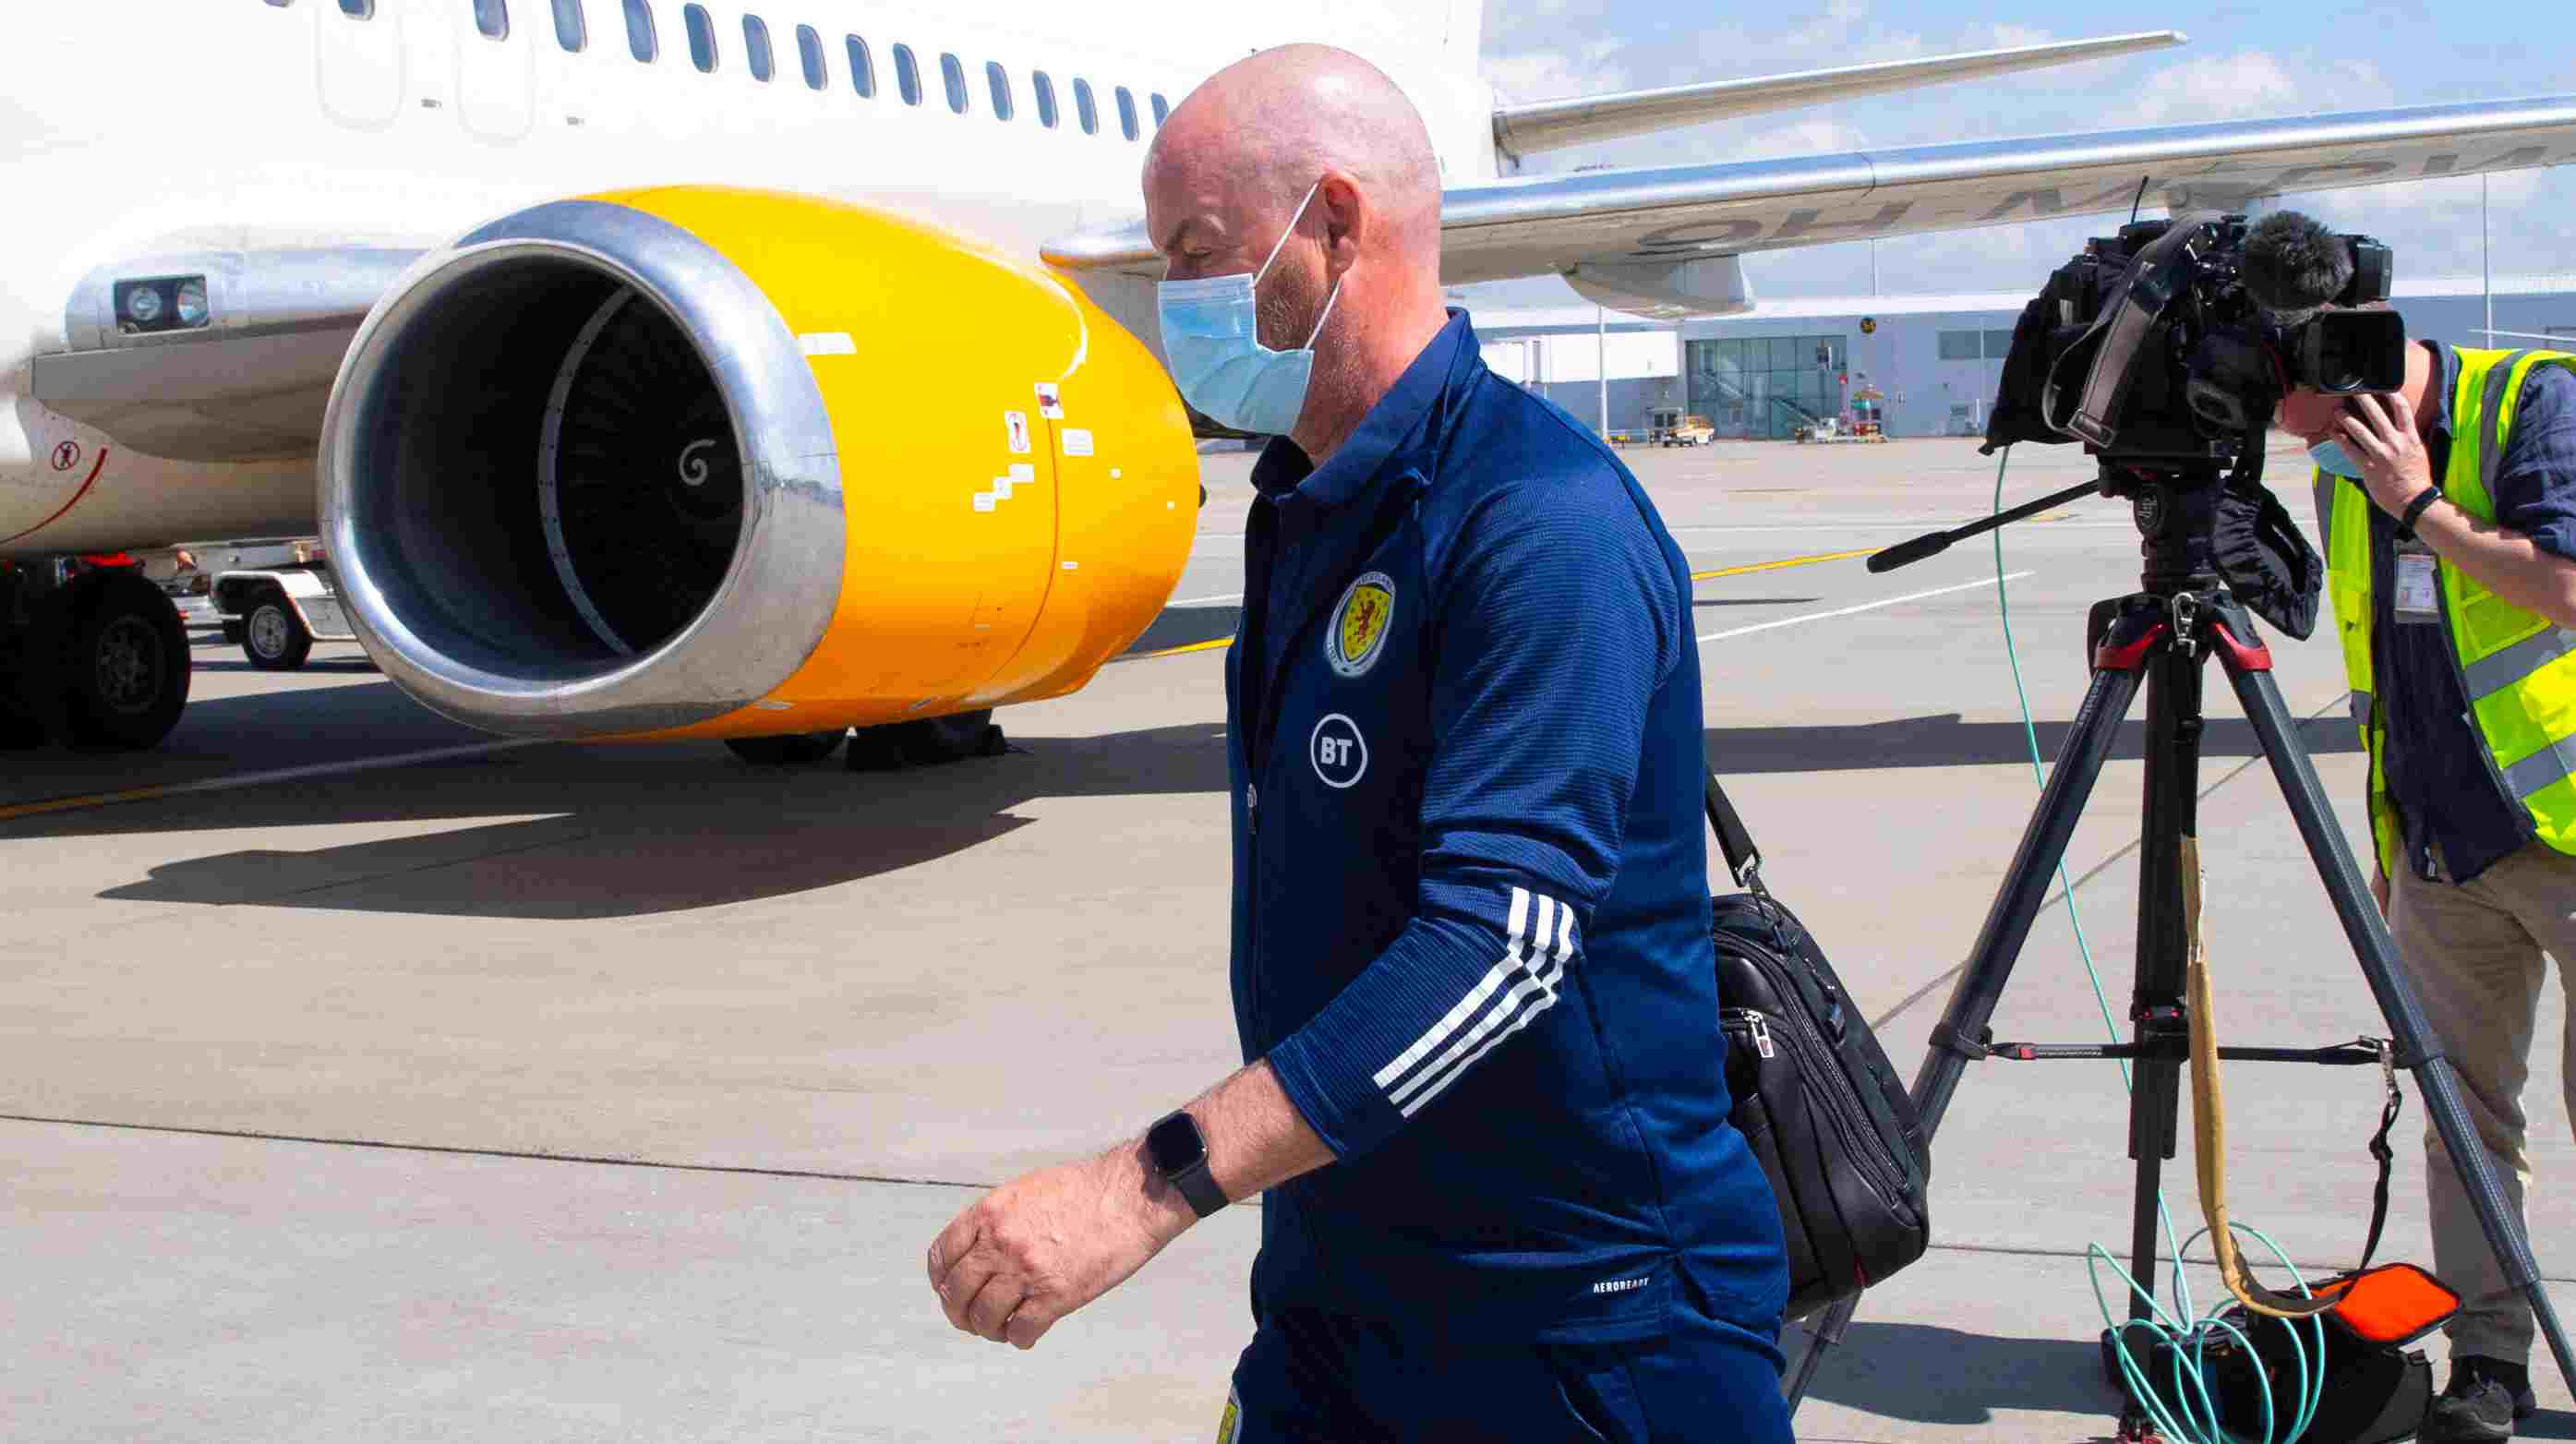 Scotland's manager Steve Clarke is pictured as Scotland depart for Spain for a training camp ahead of EURO 2020 from Glasgow Airport, on May 27, 2021, in Glasgow, Scotland.  (Photo by Alan Harvey / SNS Group)